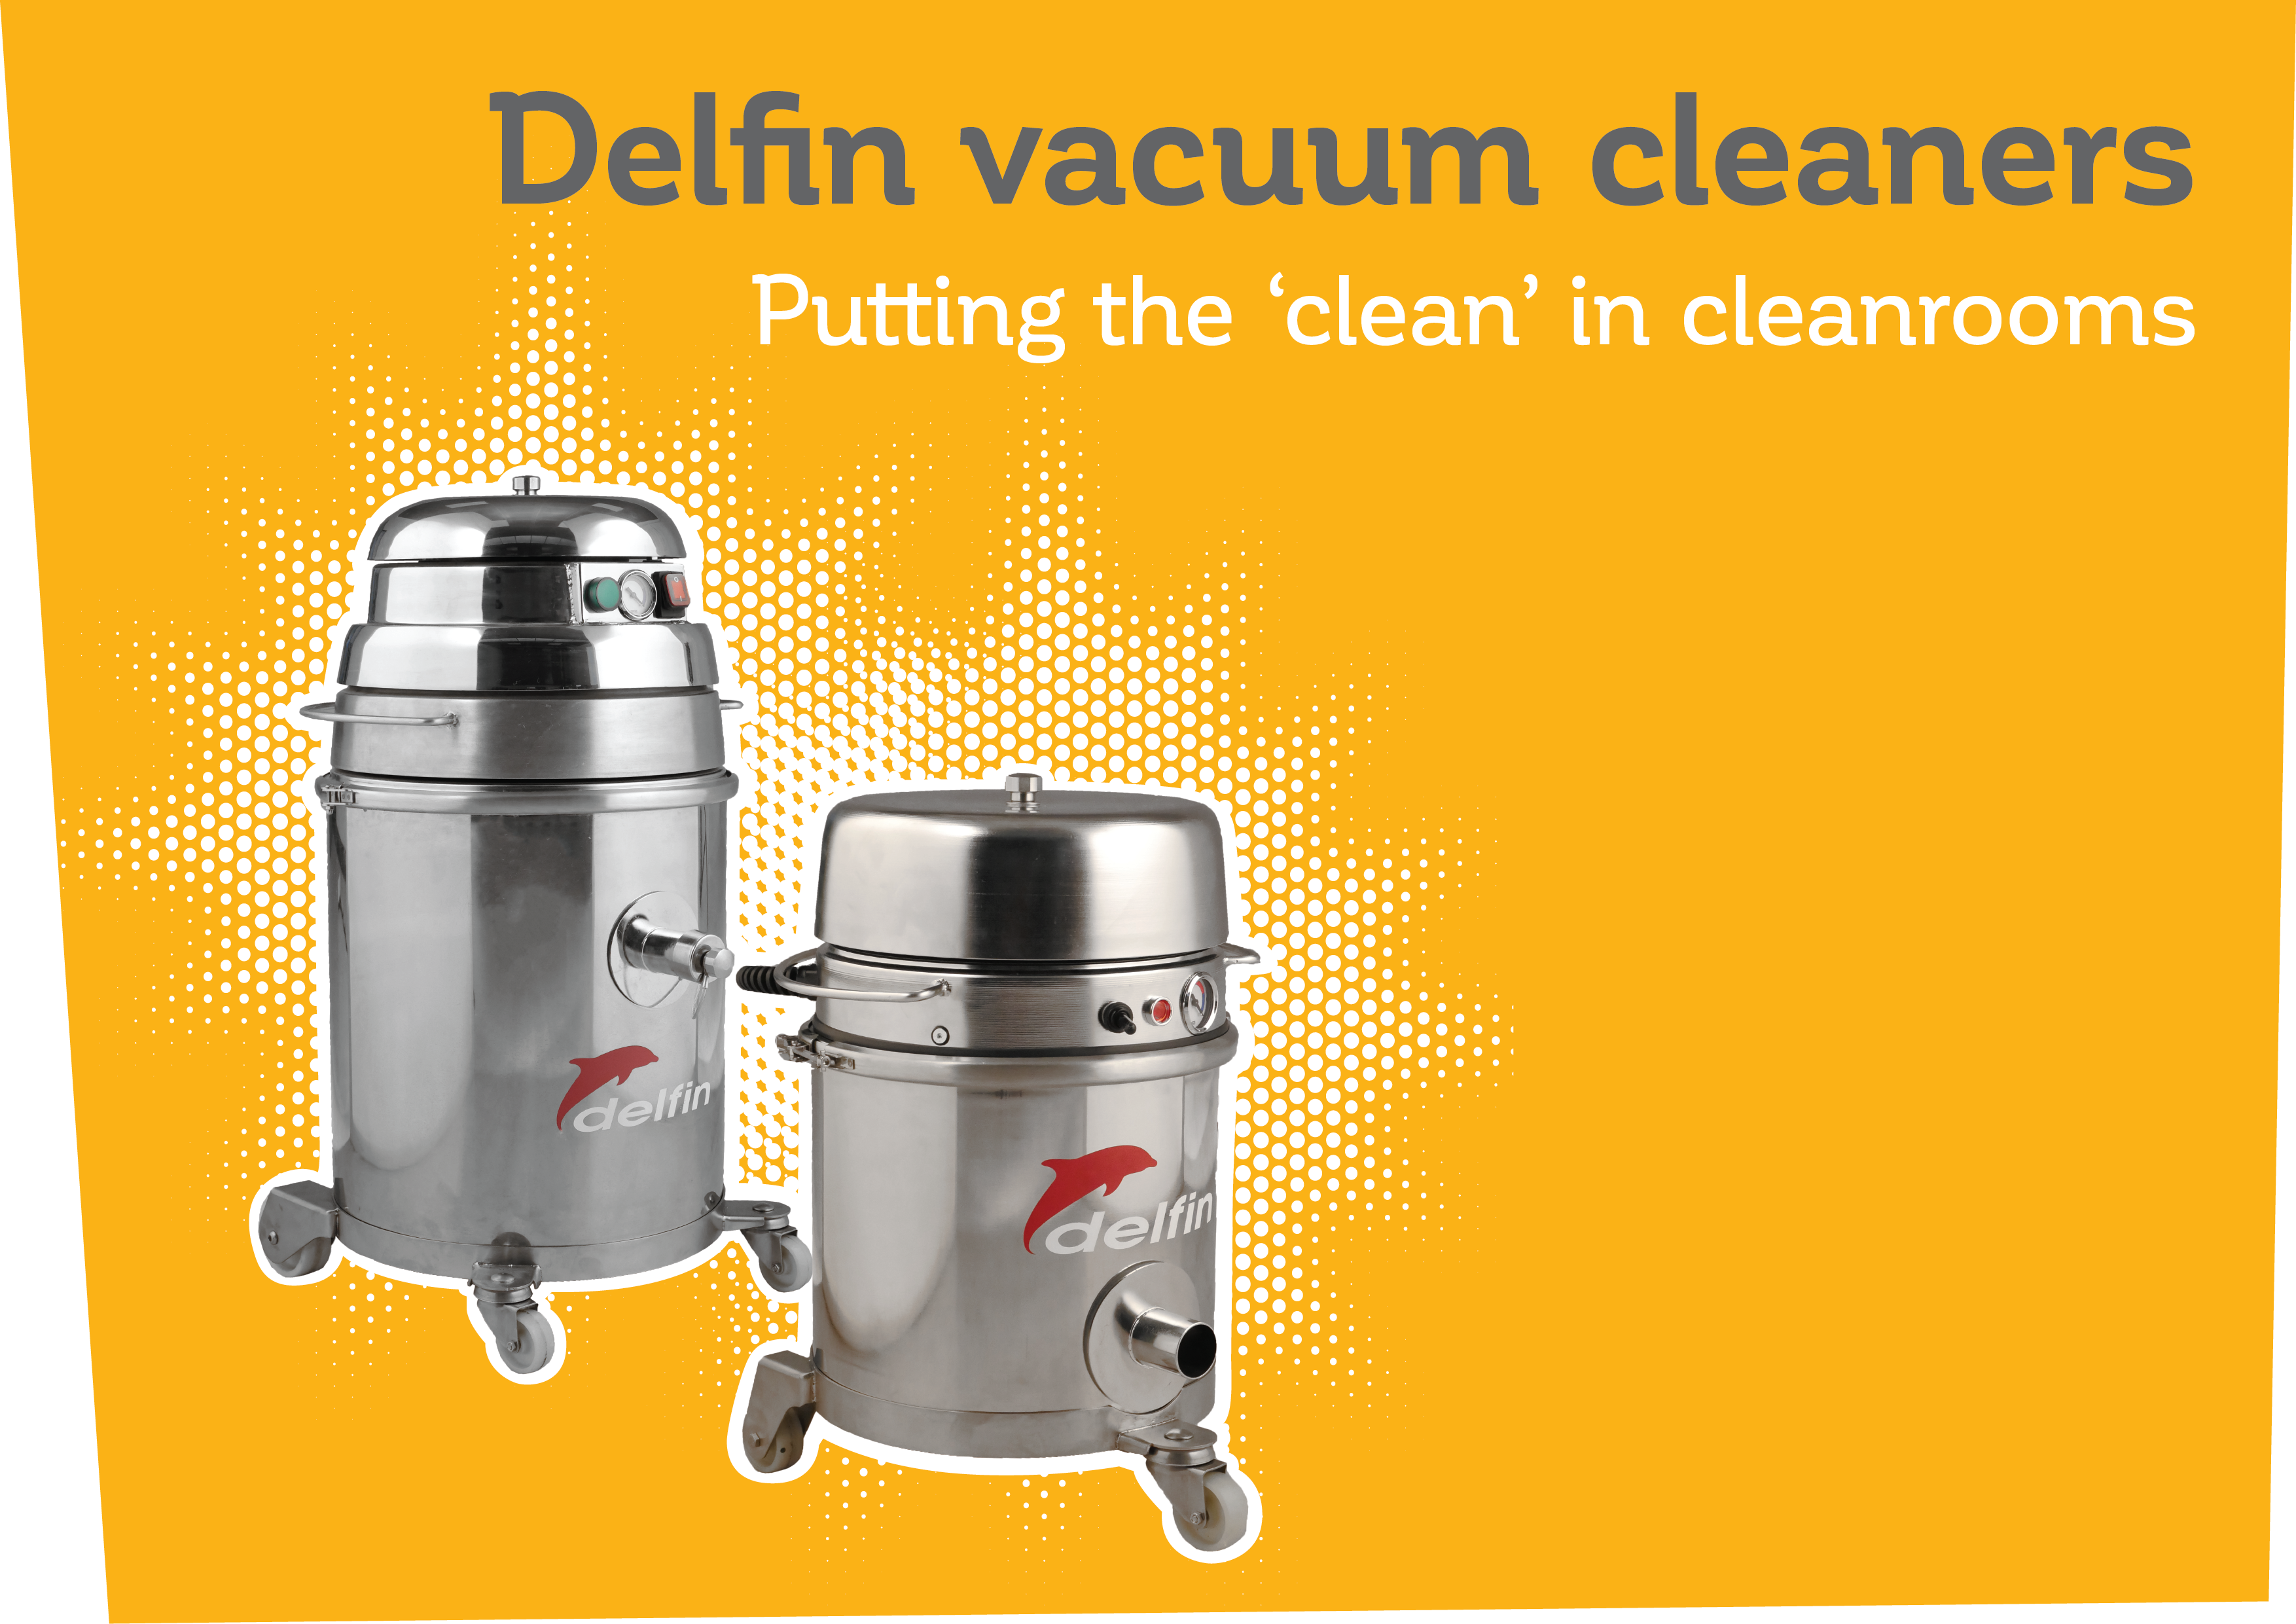 Delfin vacuum cleaners: Putting the 'clean' in cleanroom